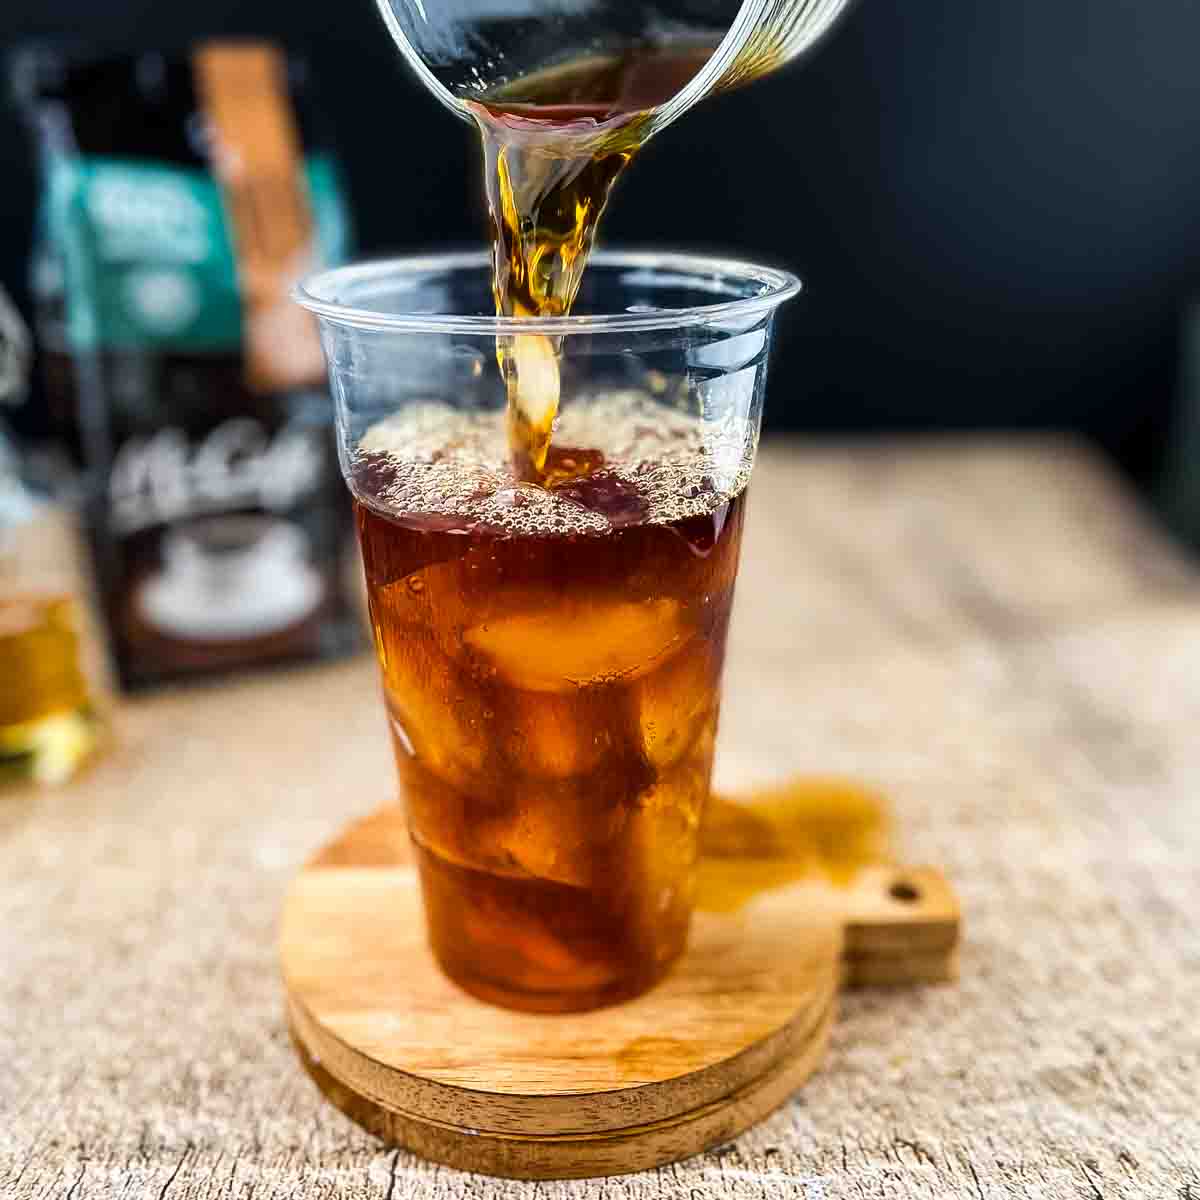 Cold coffee being poured over ice cubes in a tall glass.